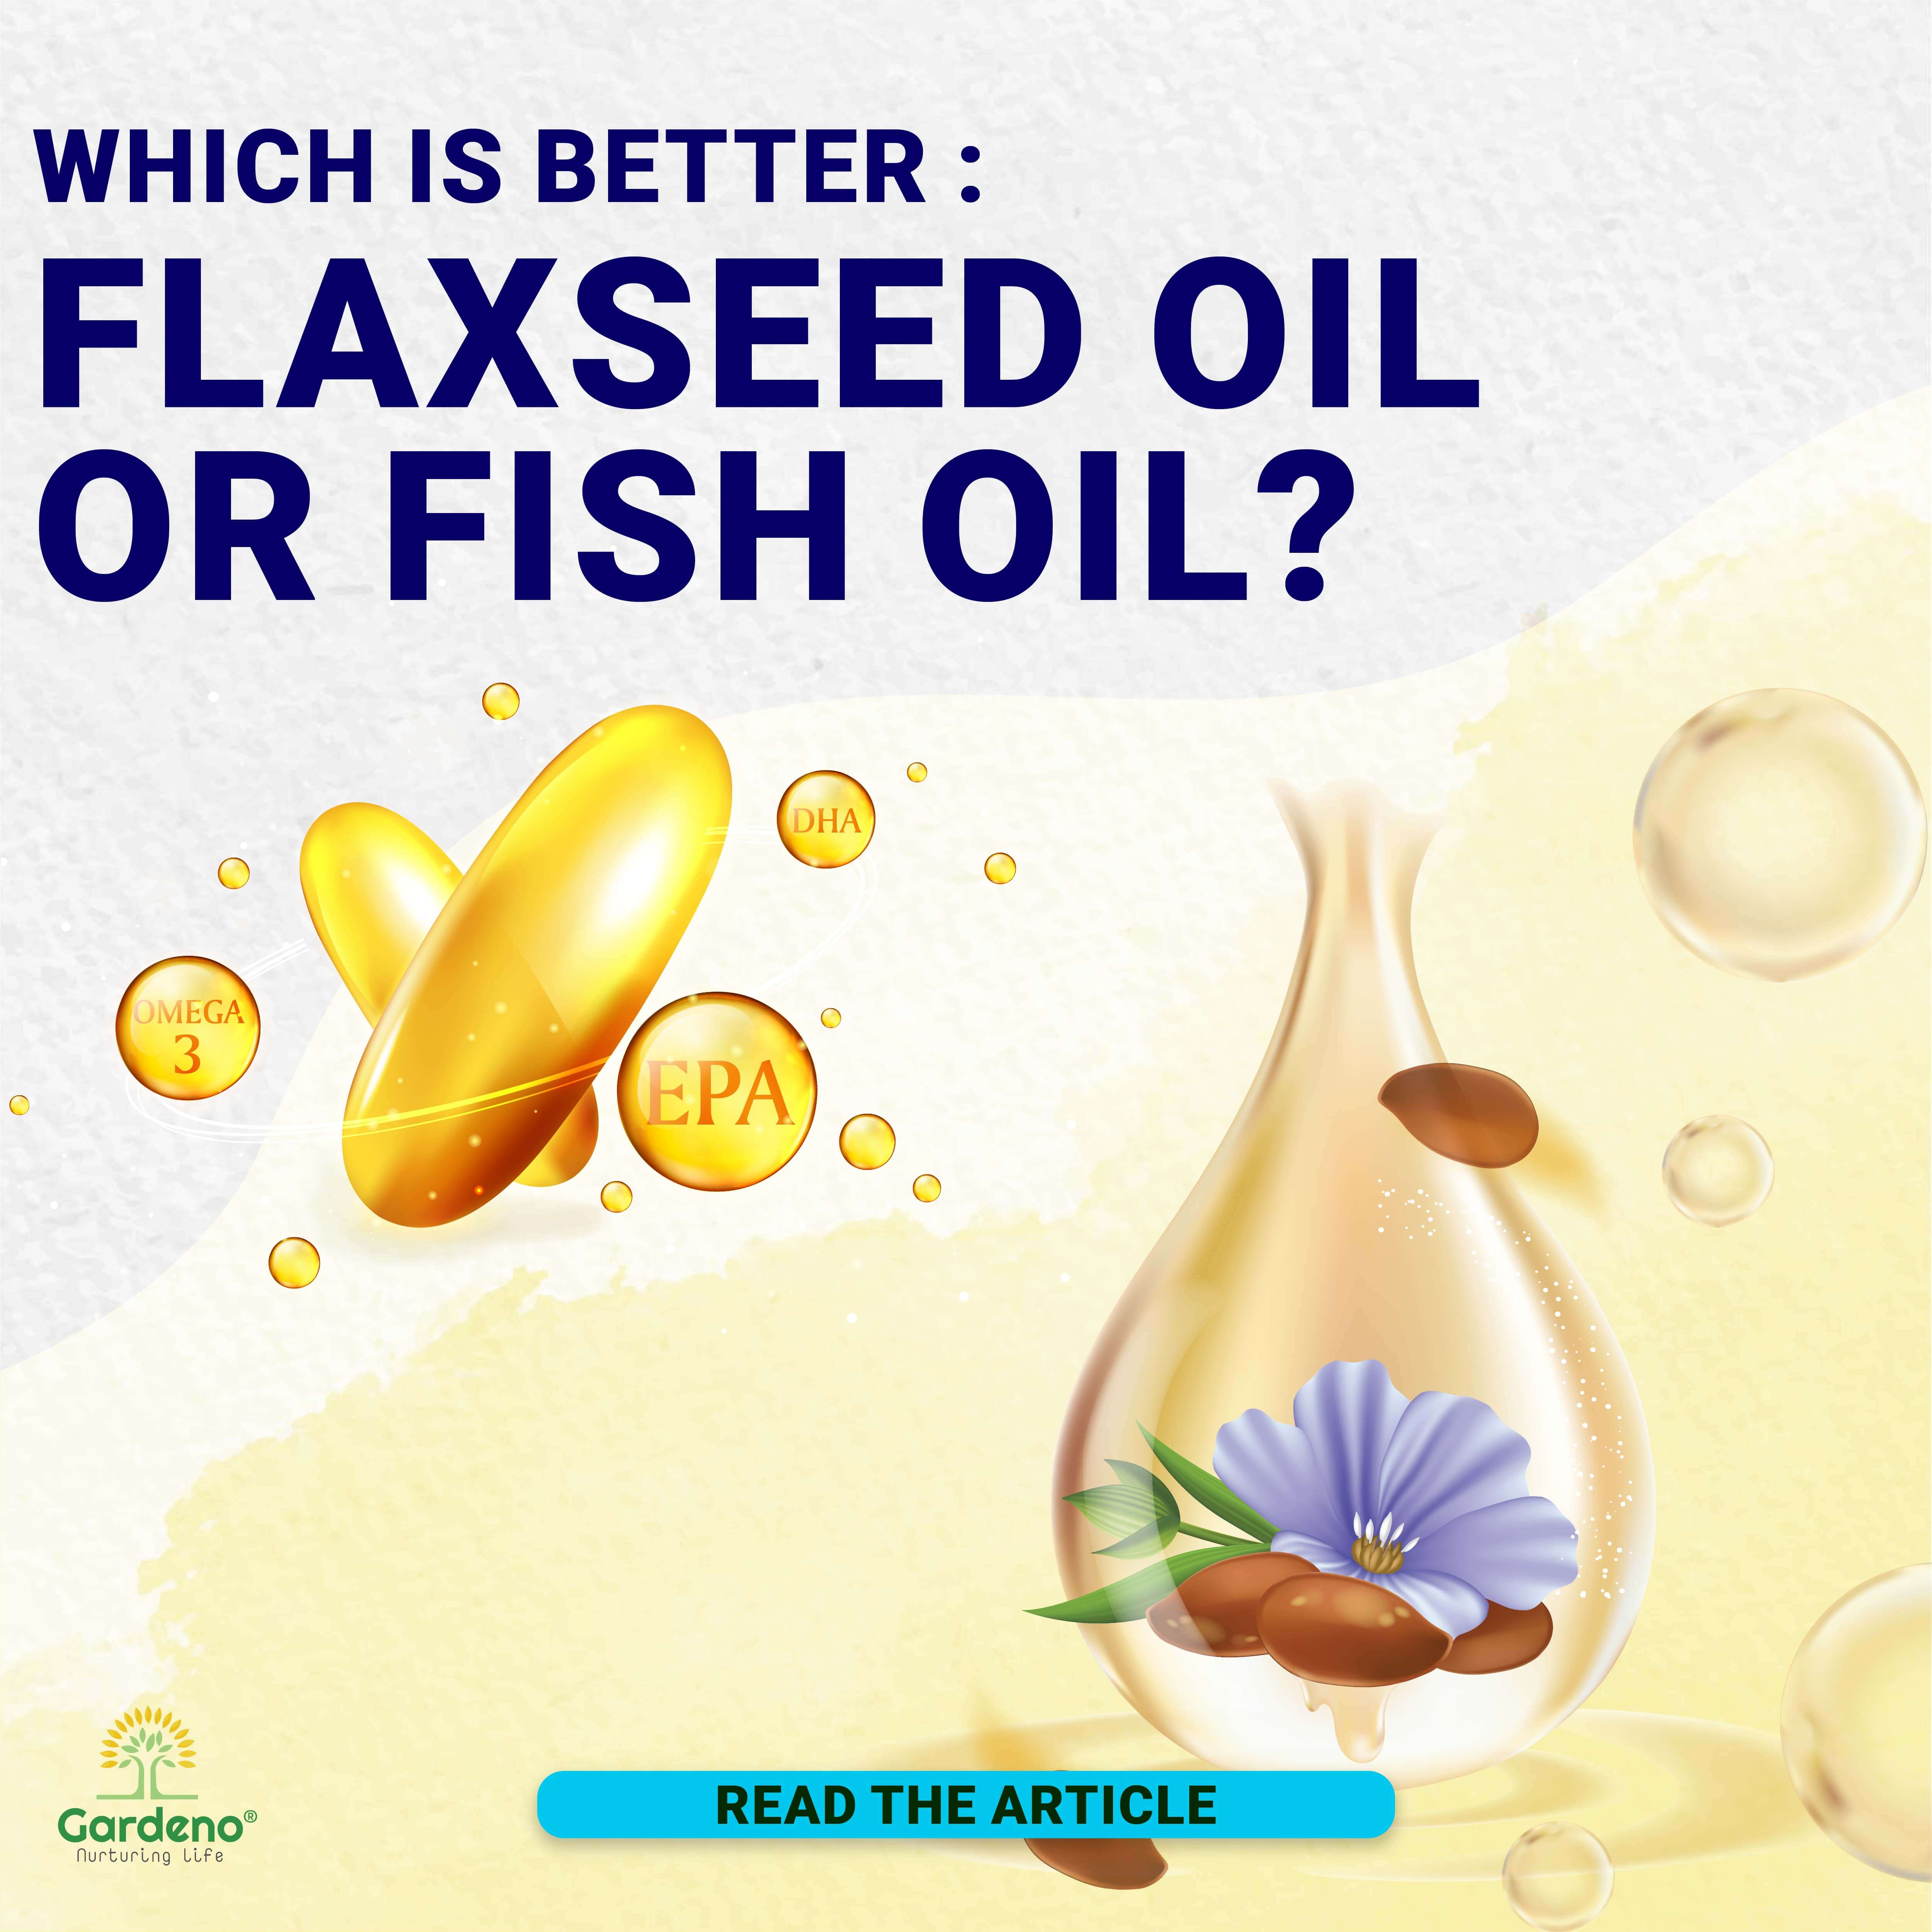 Flaxseed Oil vs. Fish Oil, Which Is Better?